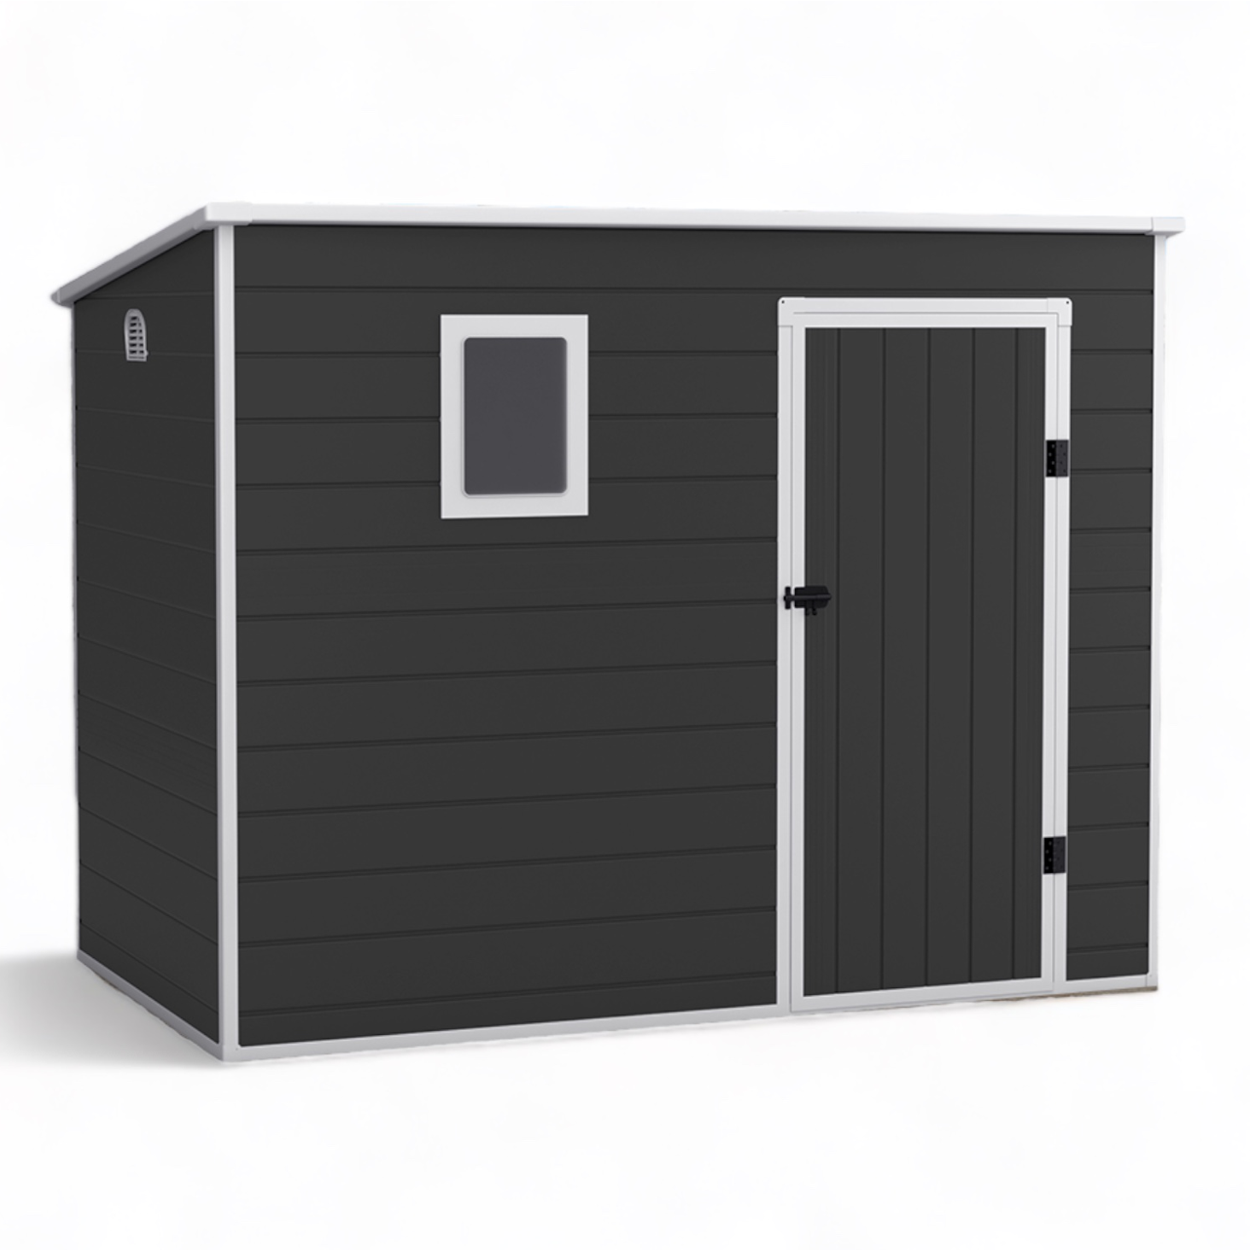 Featured image for “LOTUS | Oxonia Pent Plastic Shed 8x5”